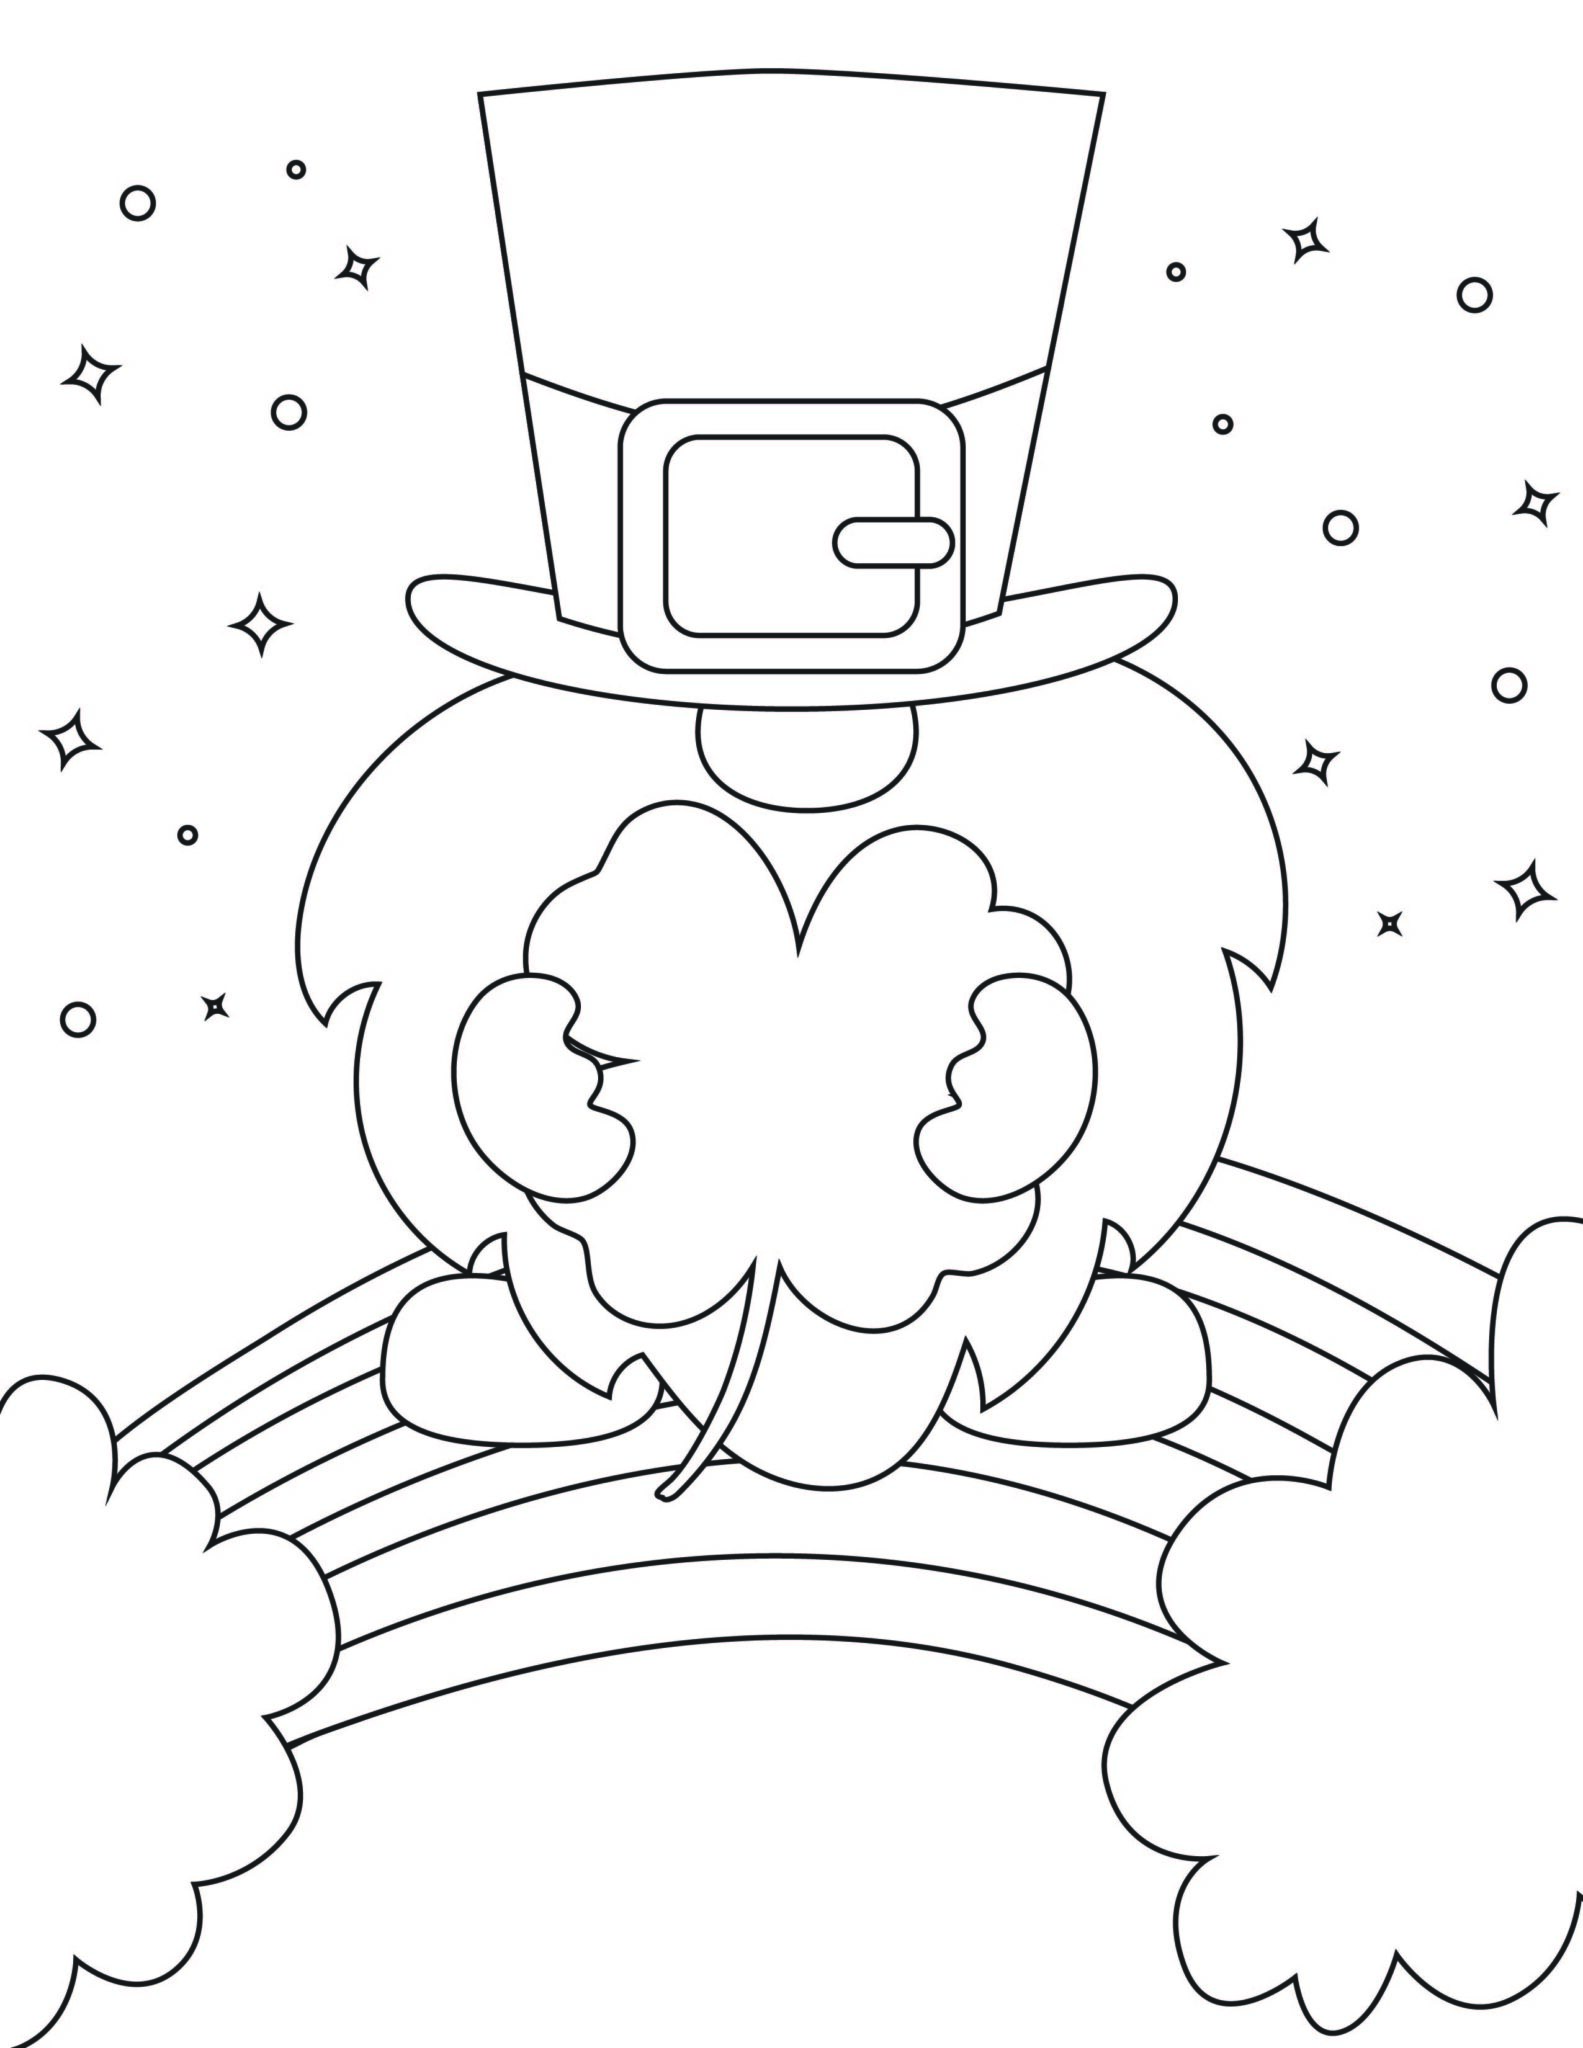 St. Patrick's Gnomes Coloring Pages